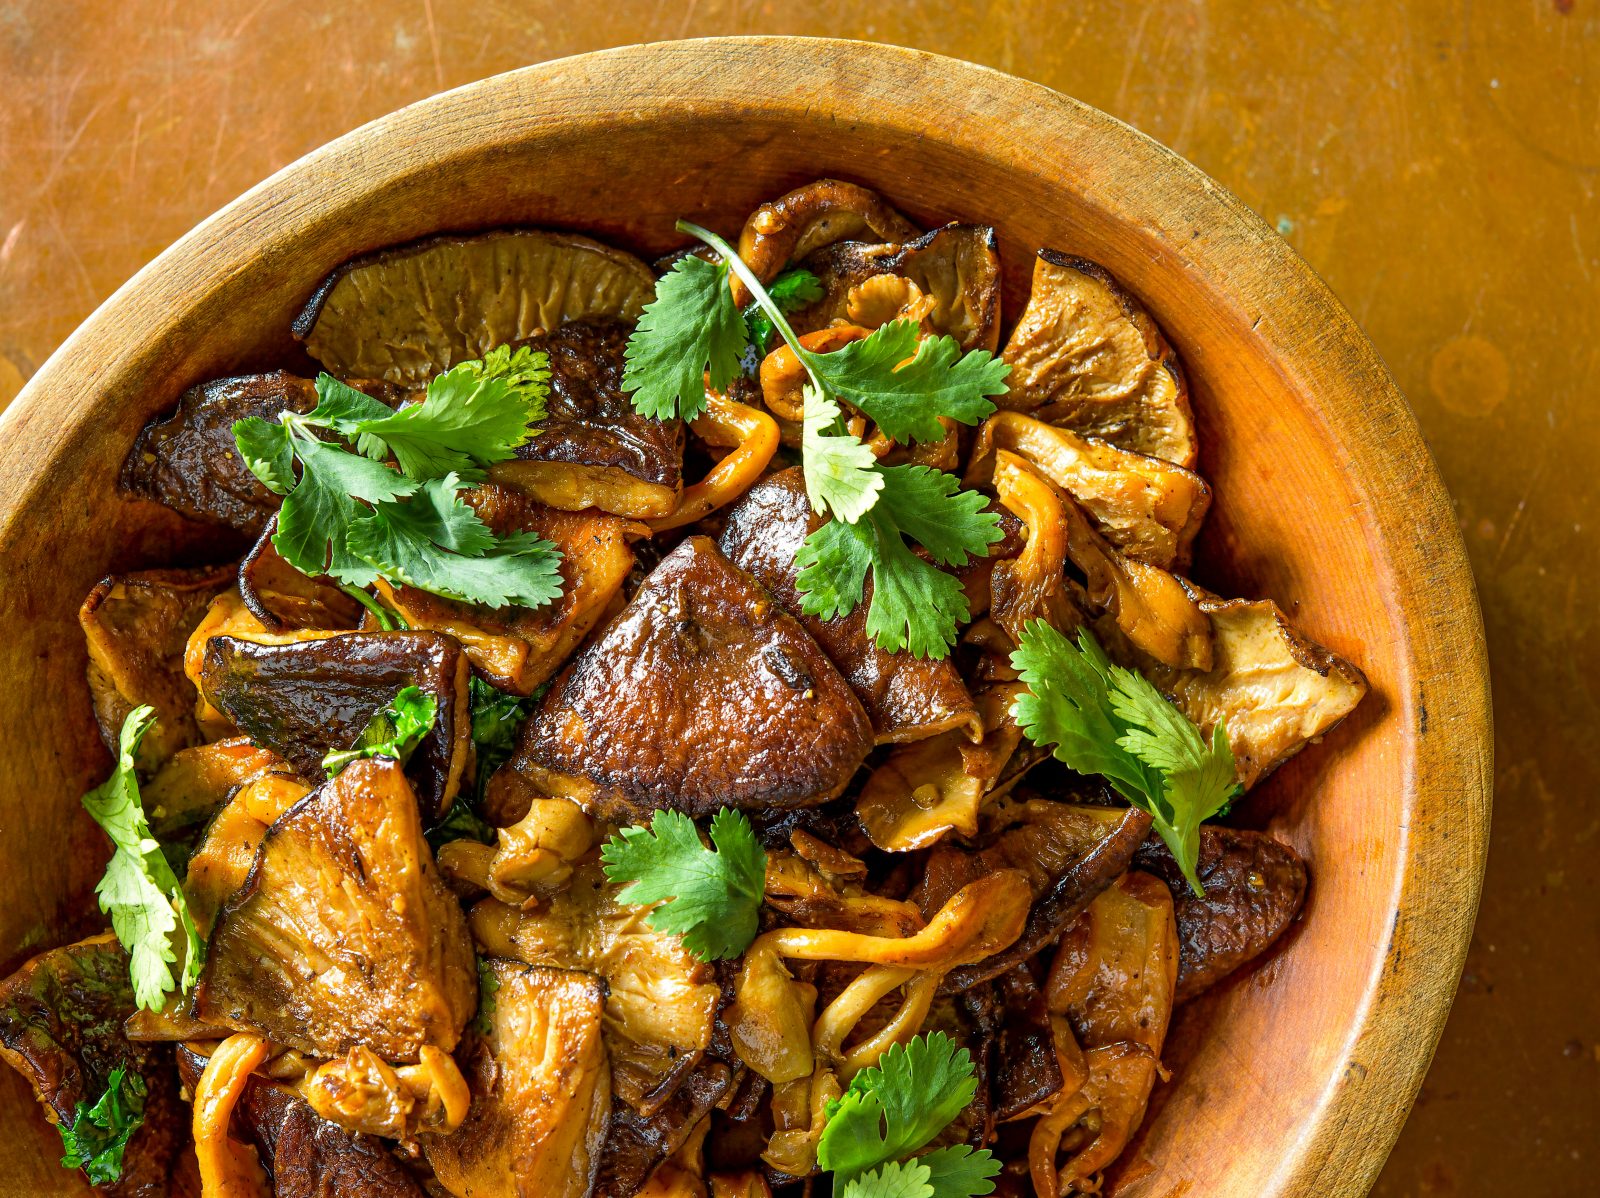 Braised Mushrooms with Sichuan Chili Oil